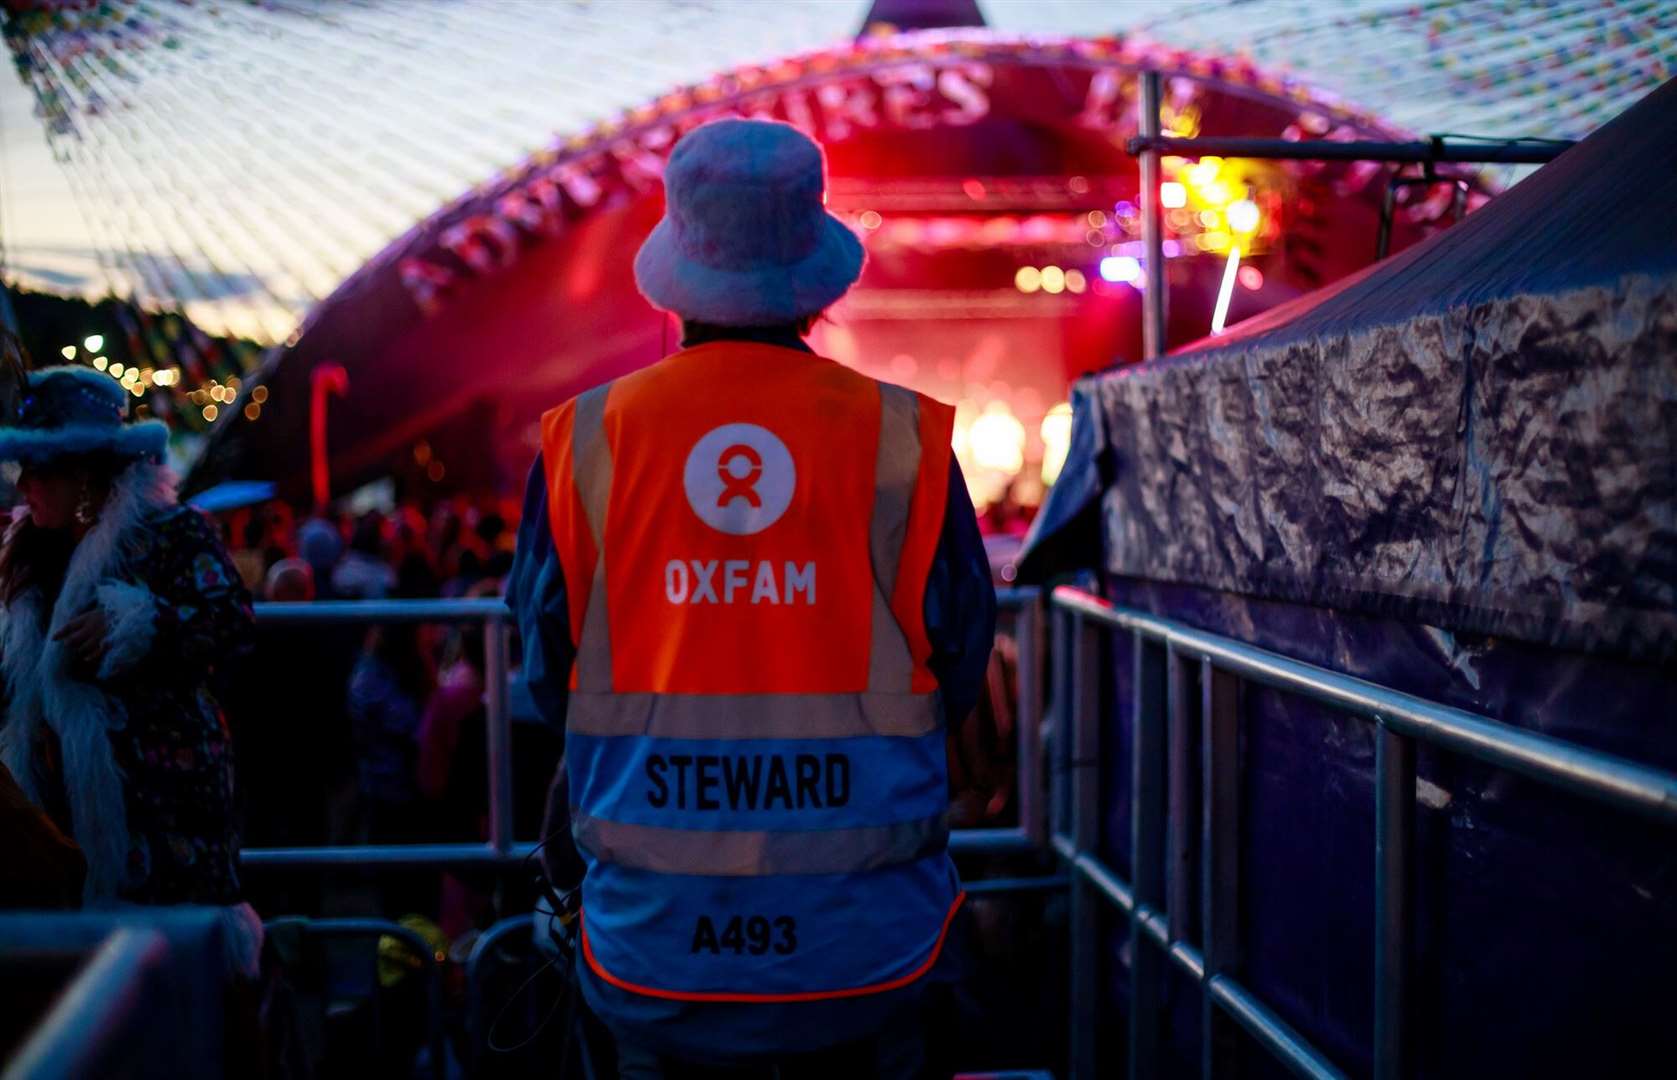 Some stewards may be given roles in accessibility areas close to the stage. Image: Oxfam.